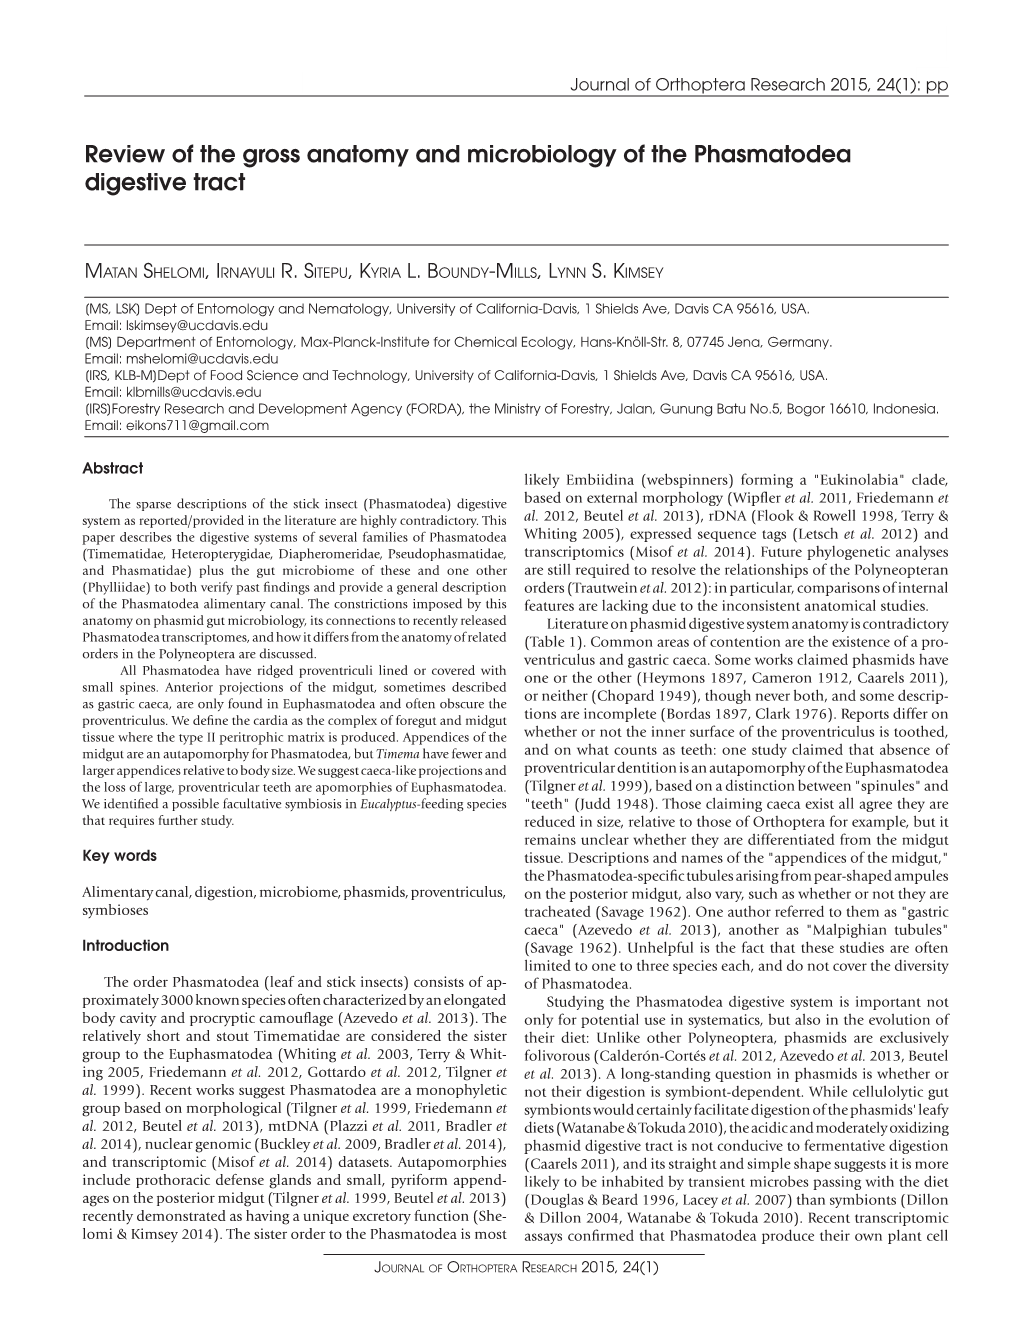 Review of the Gross Anatomy and Microbiology of the Phasmatodea Digestive Tract